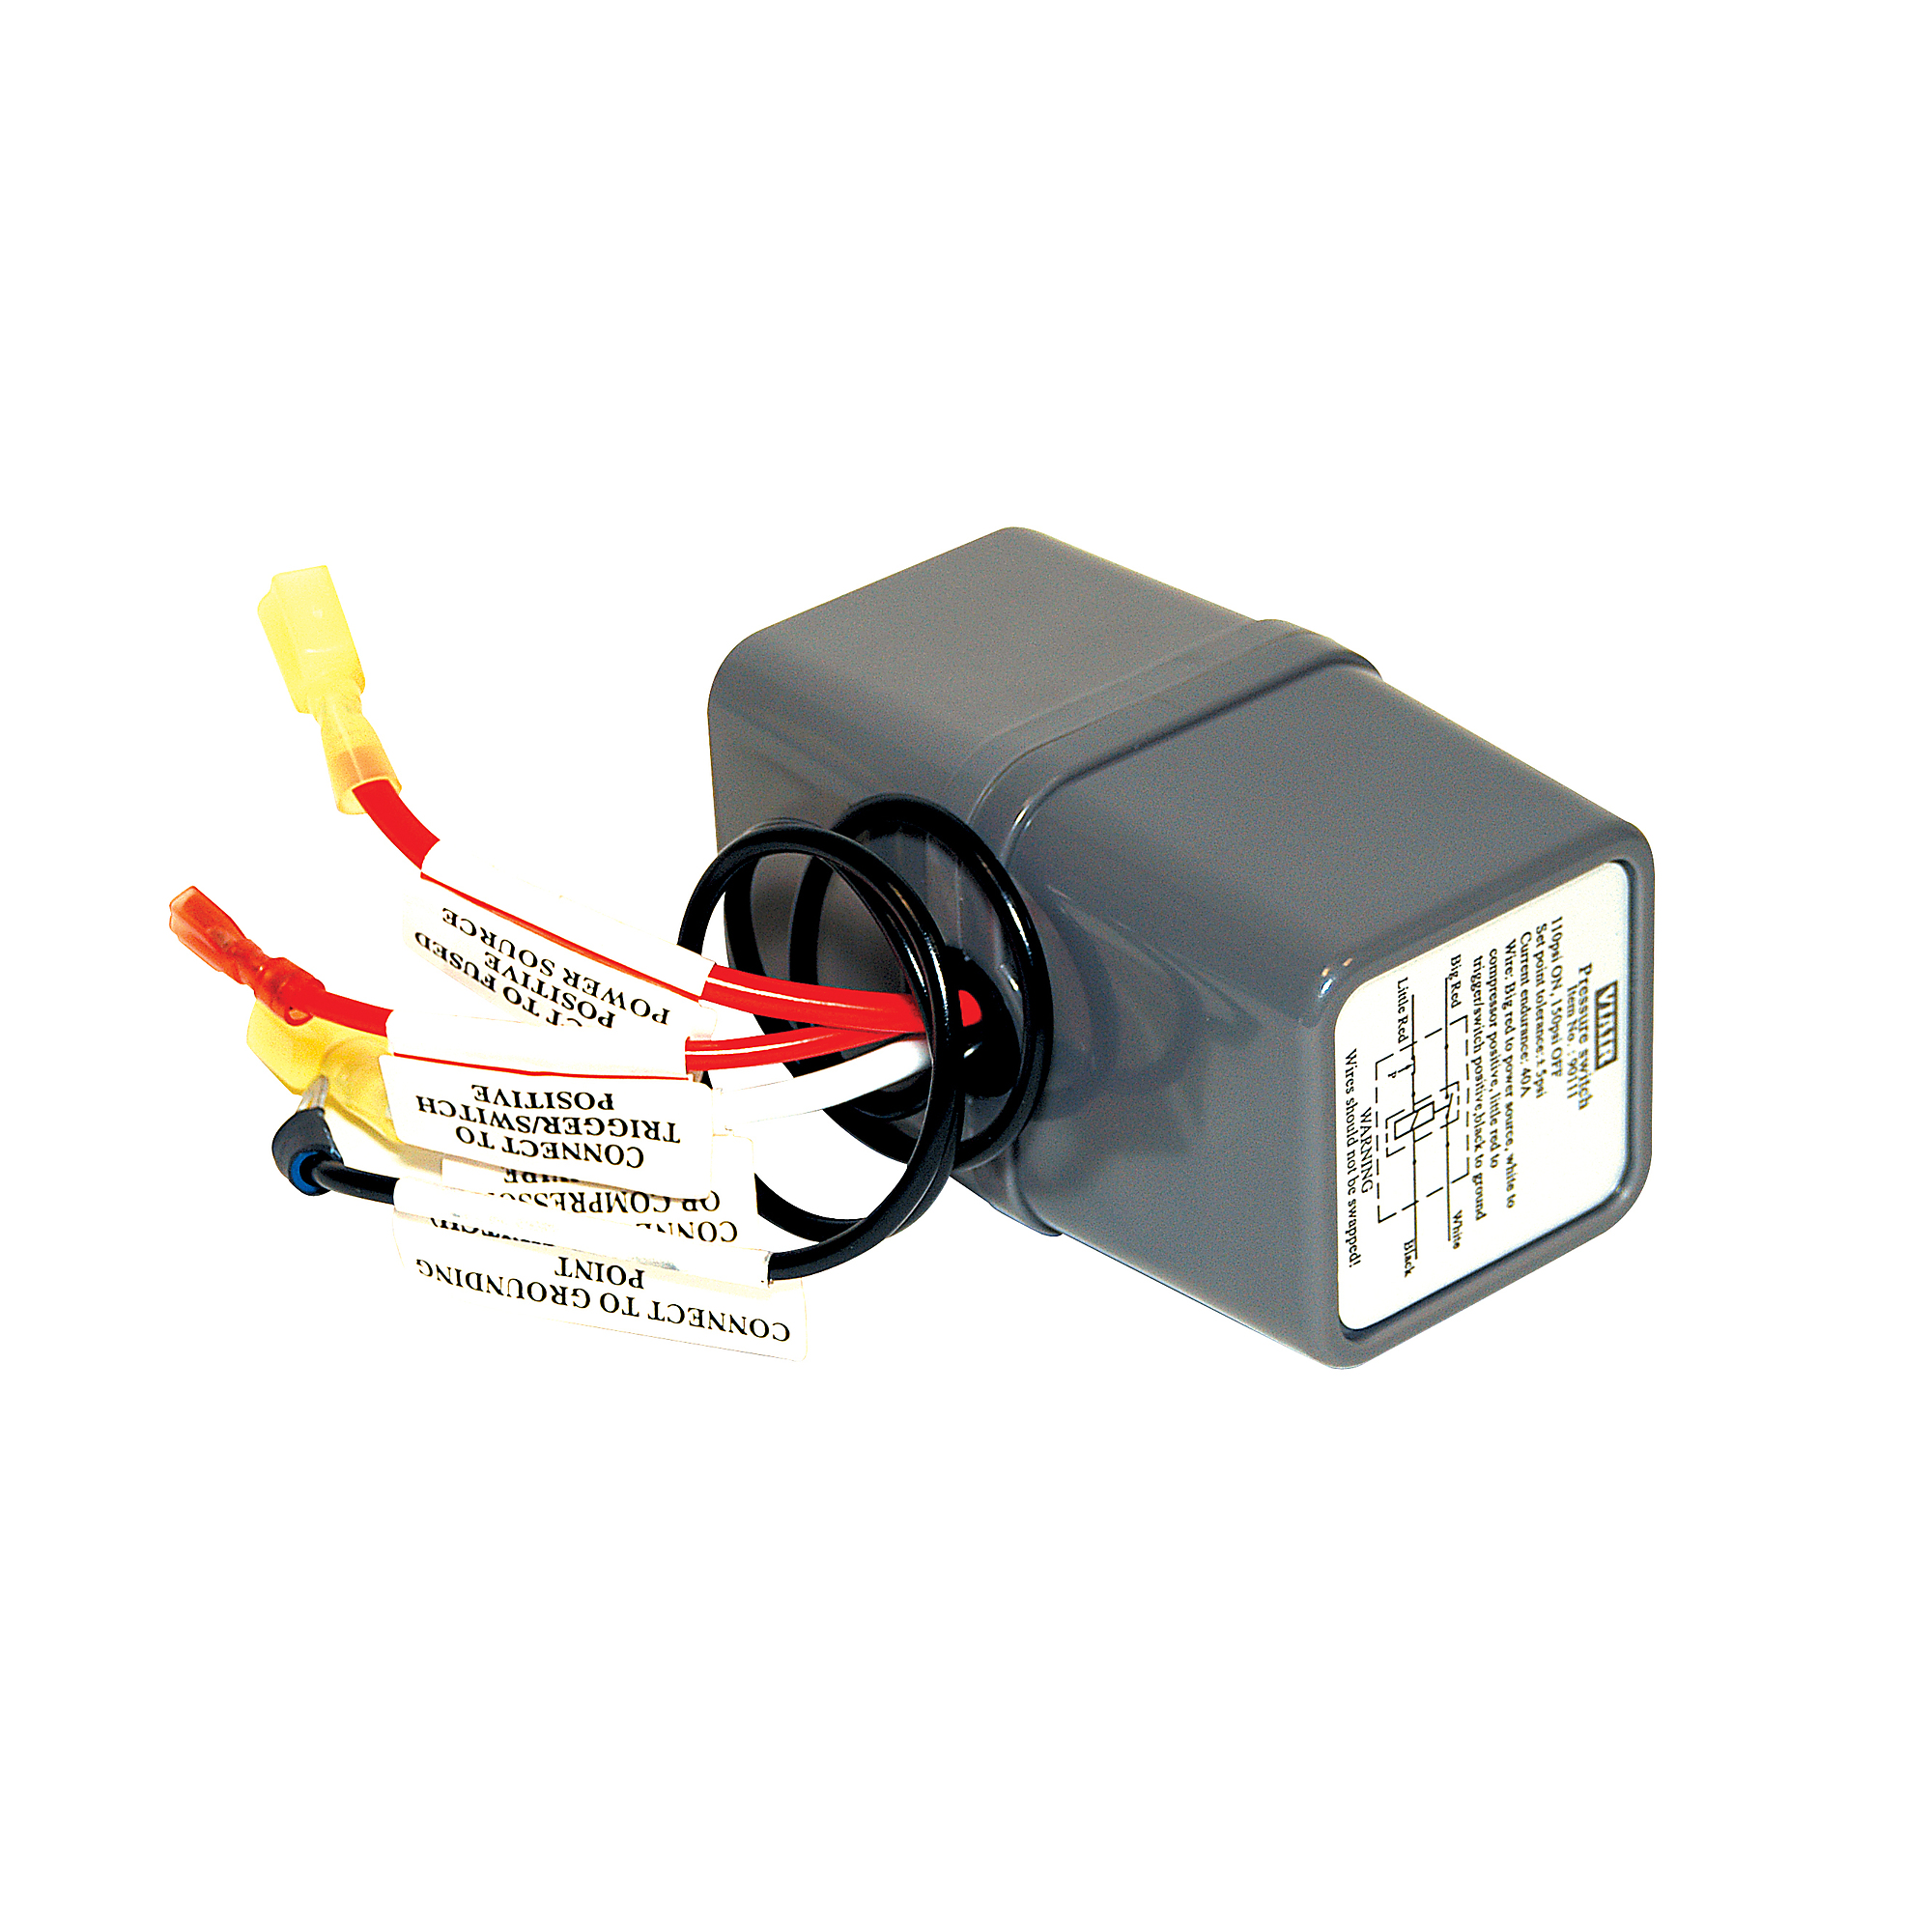 Viair, Pressure Switch with Relay, Model 90118